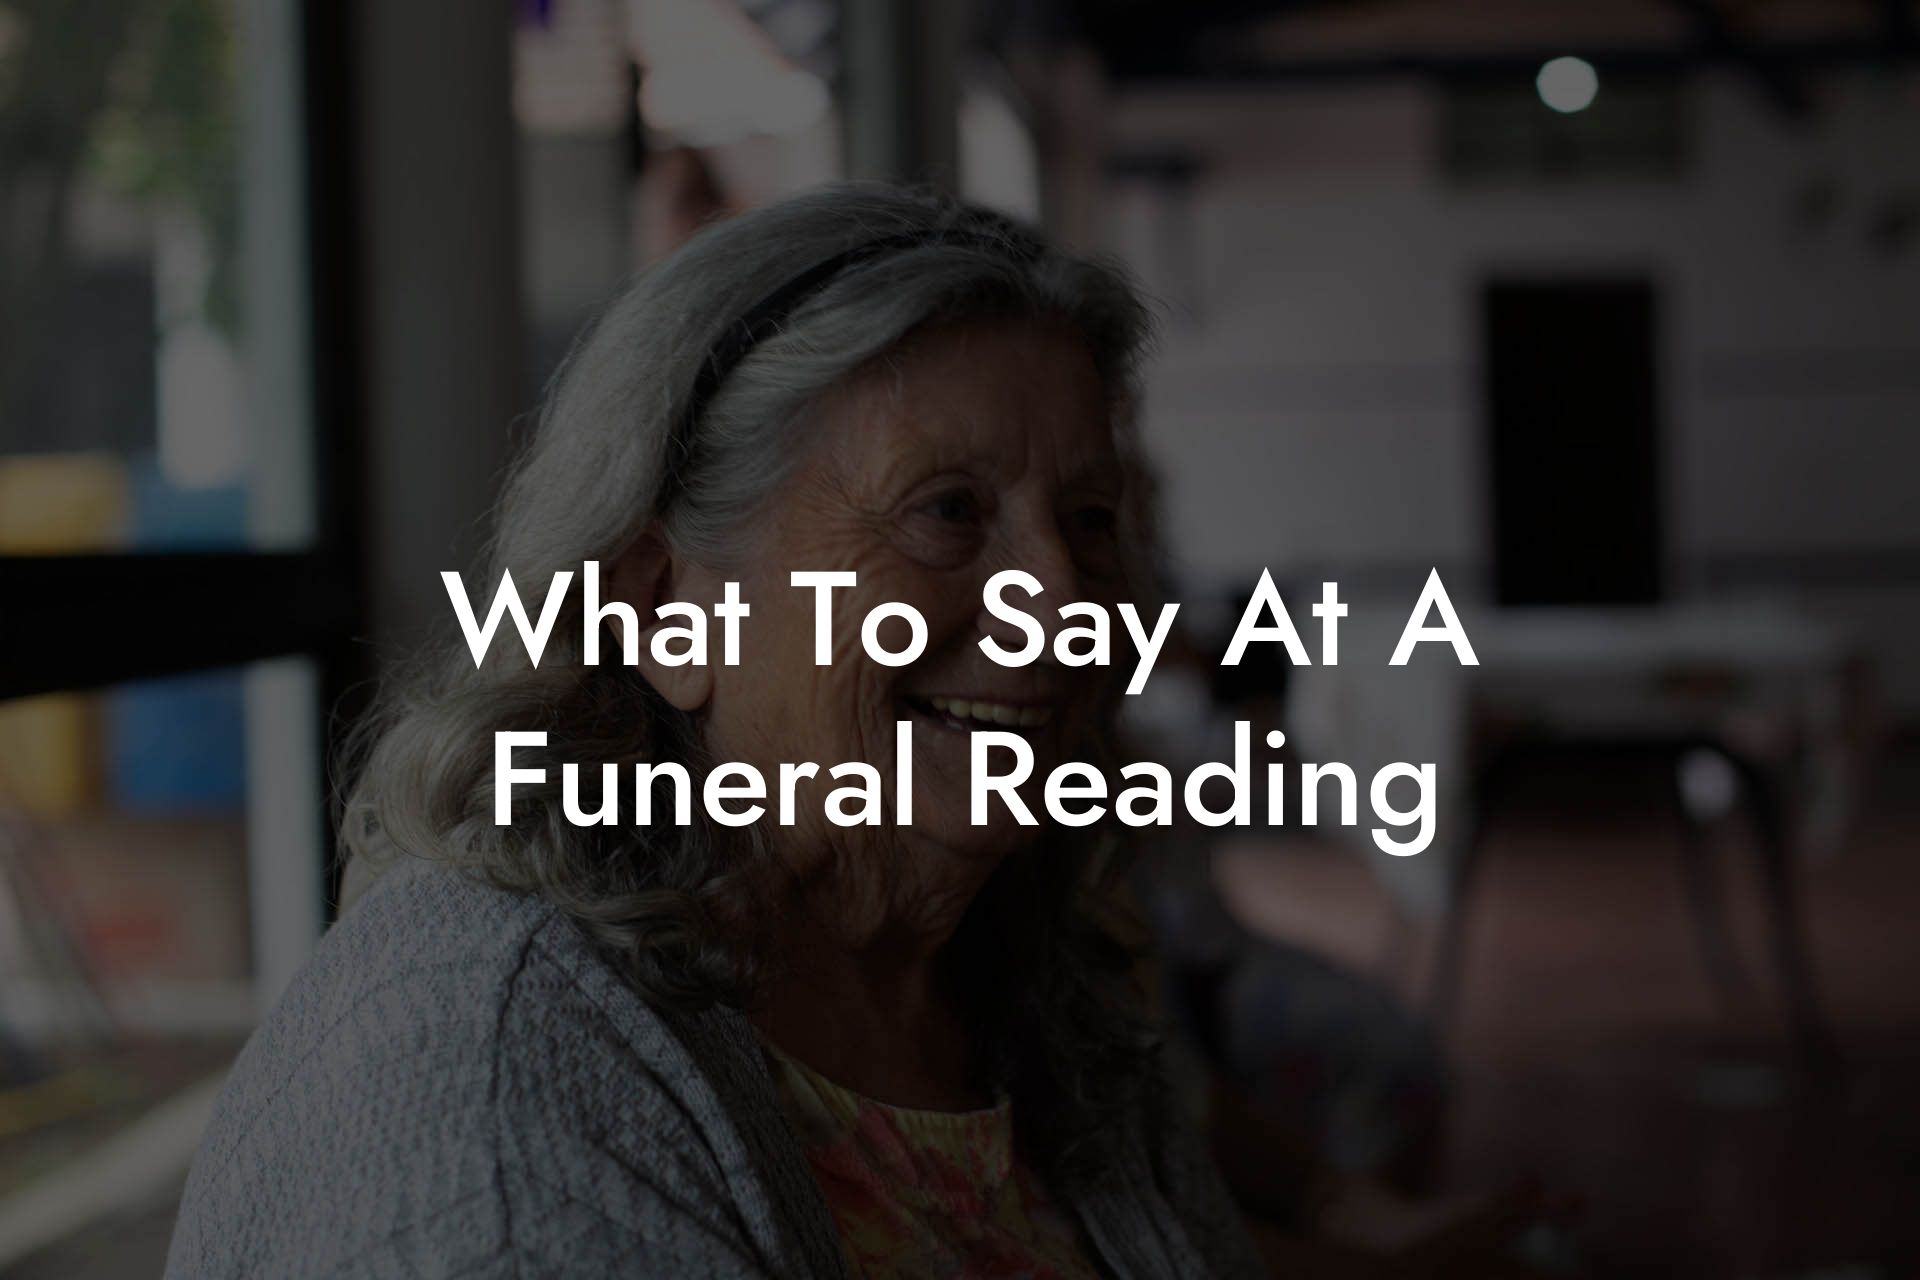 What To Say At A Funeral Reading